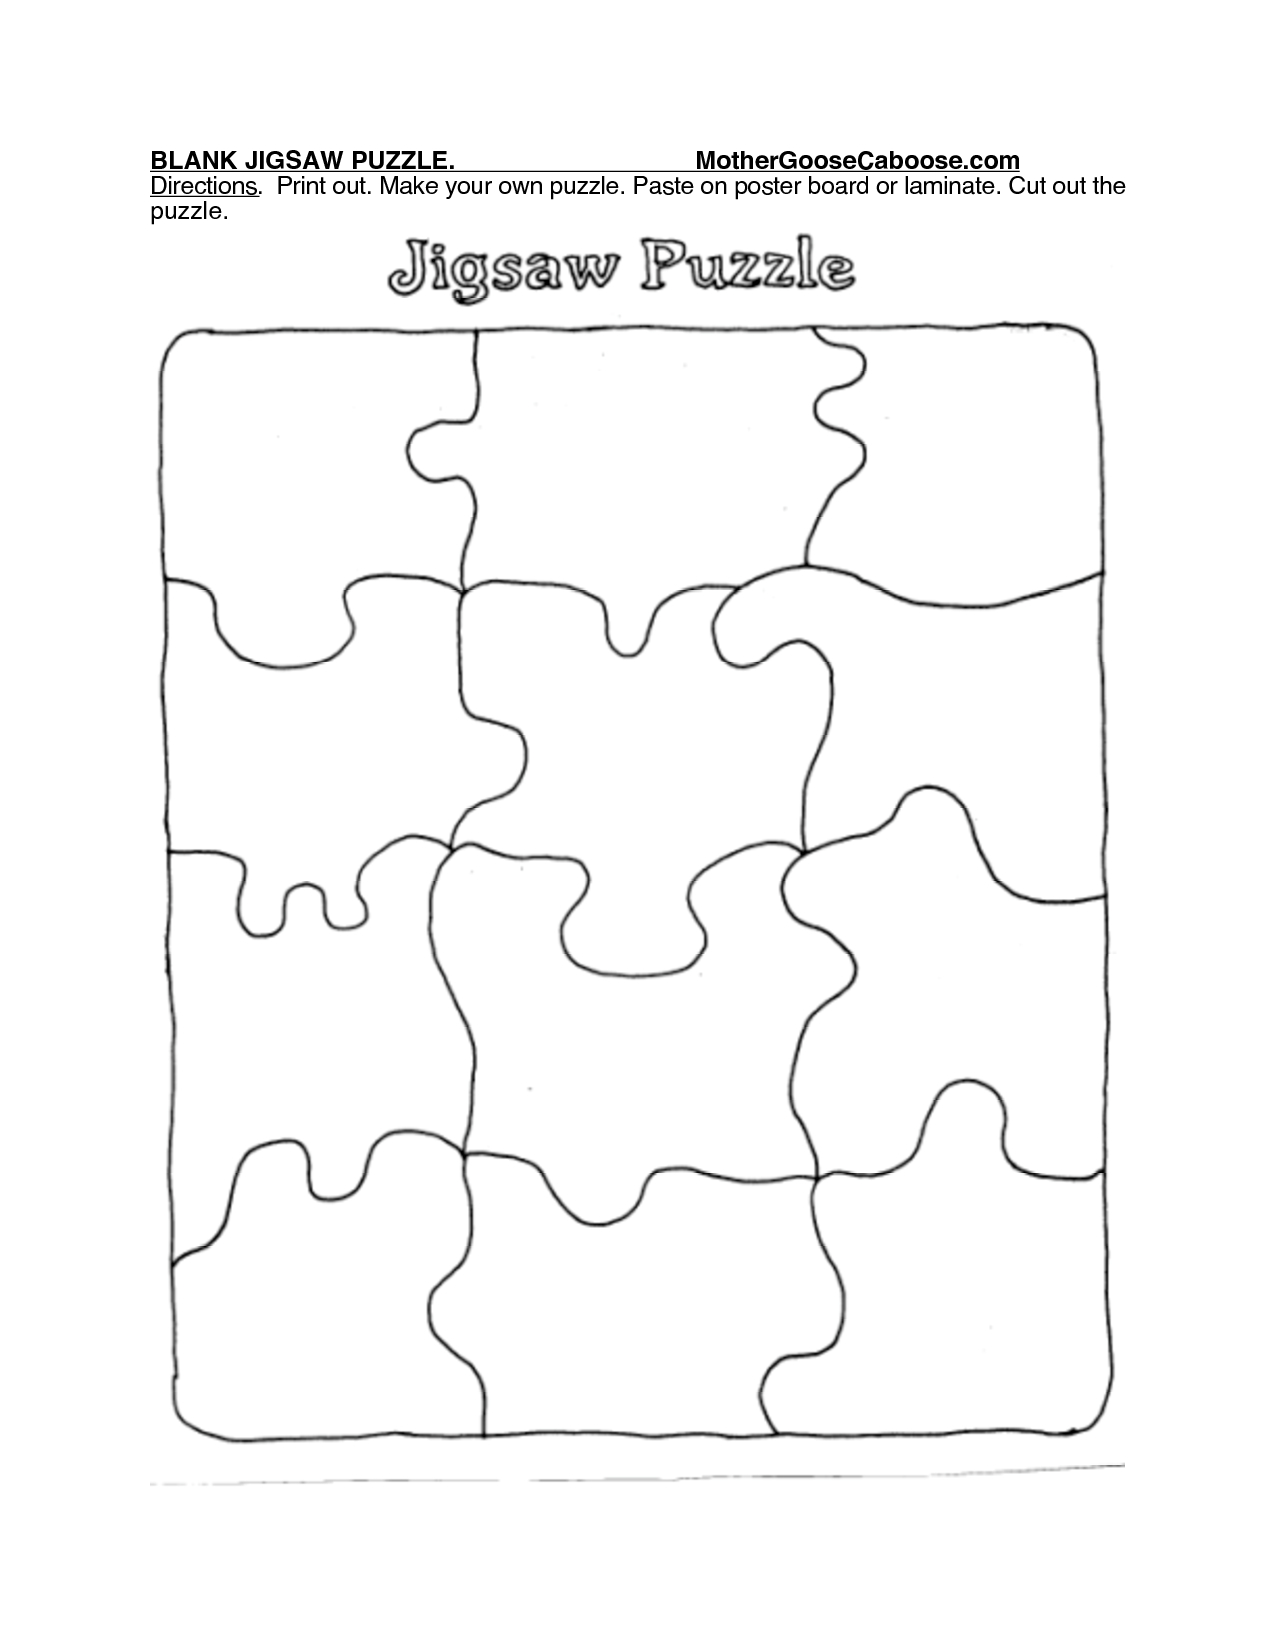 Printable Puzzle Piece Template | Search Results | New Calendar - Printable Art Puzzles